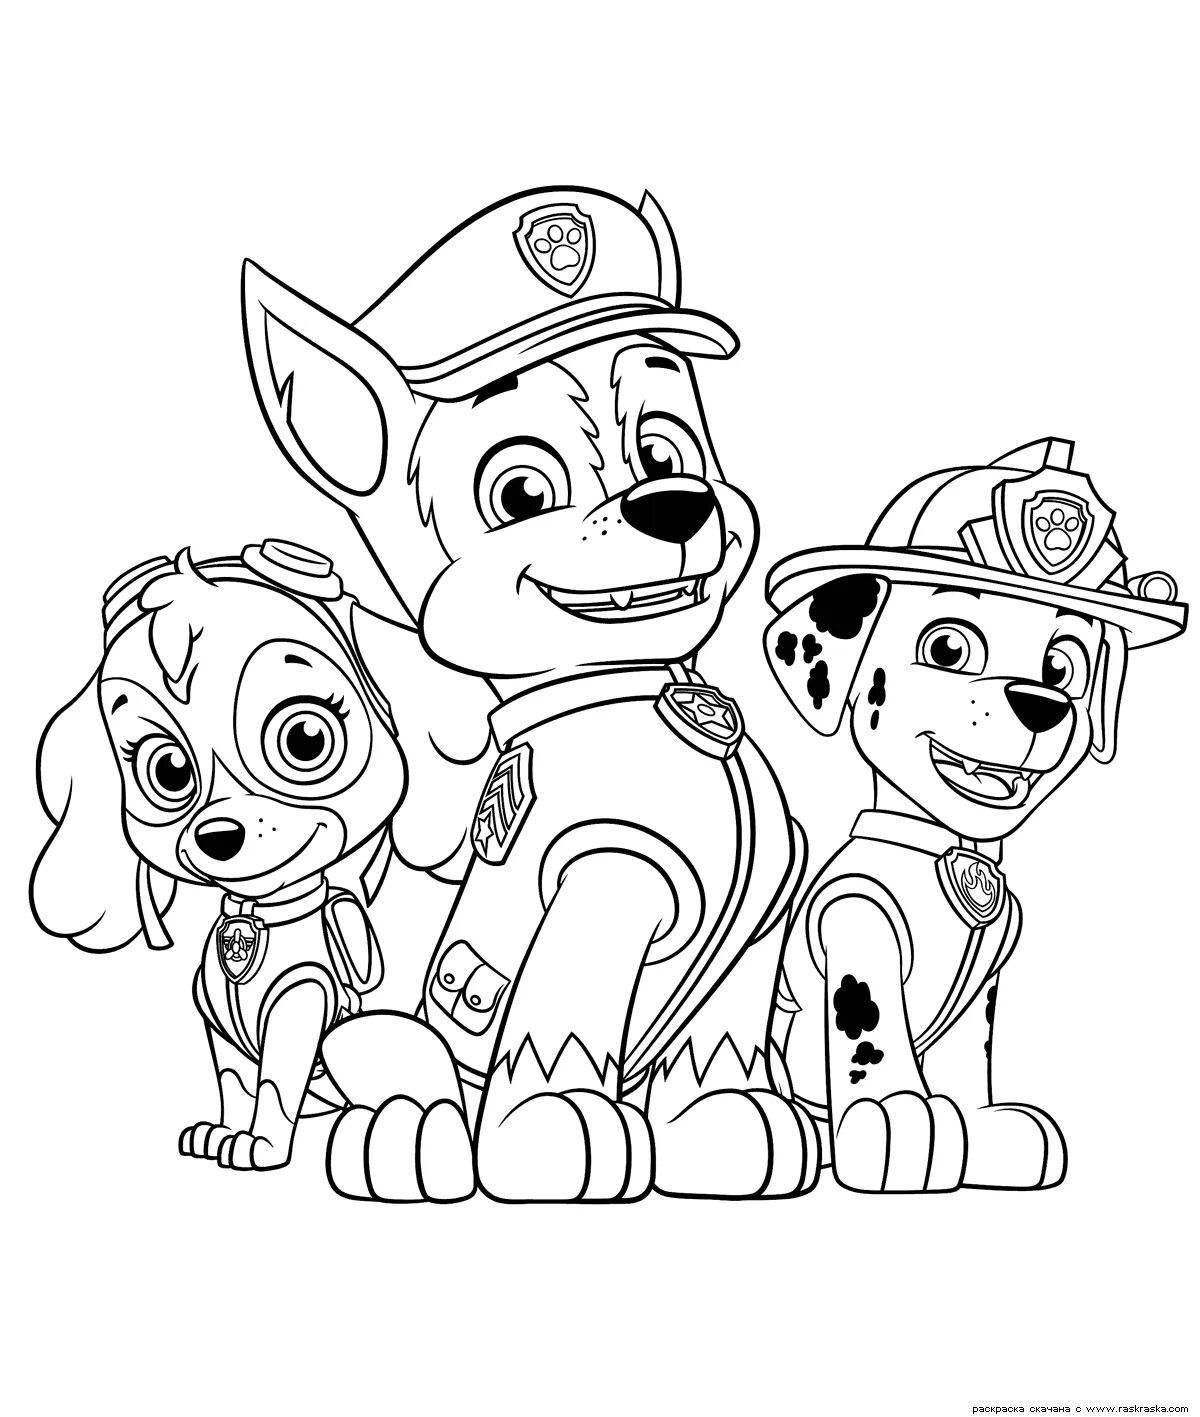 Coloring page nice racer for kids